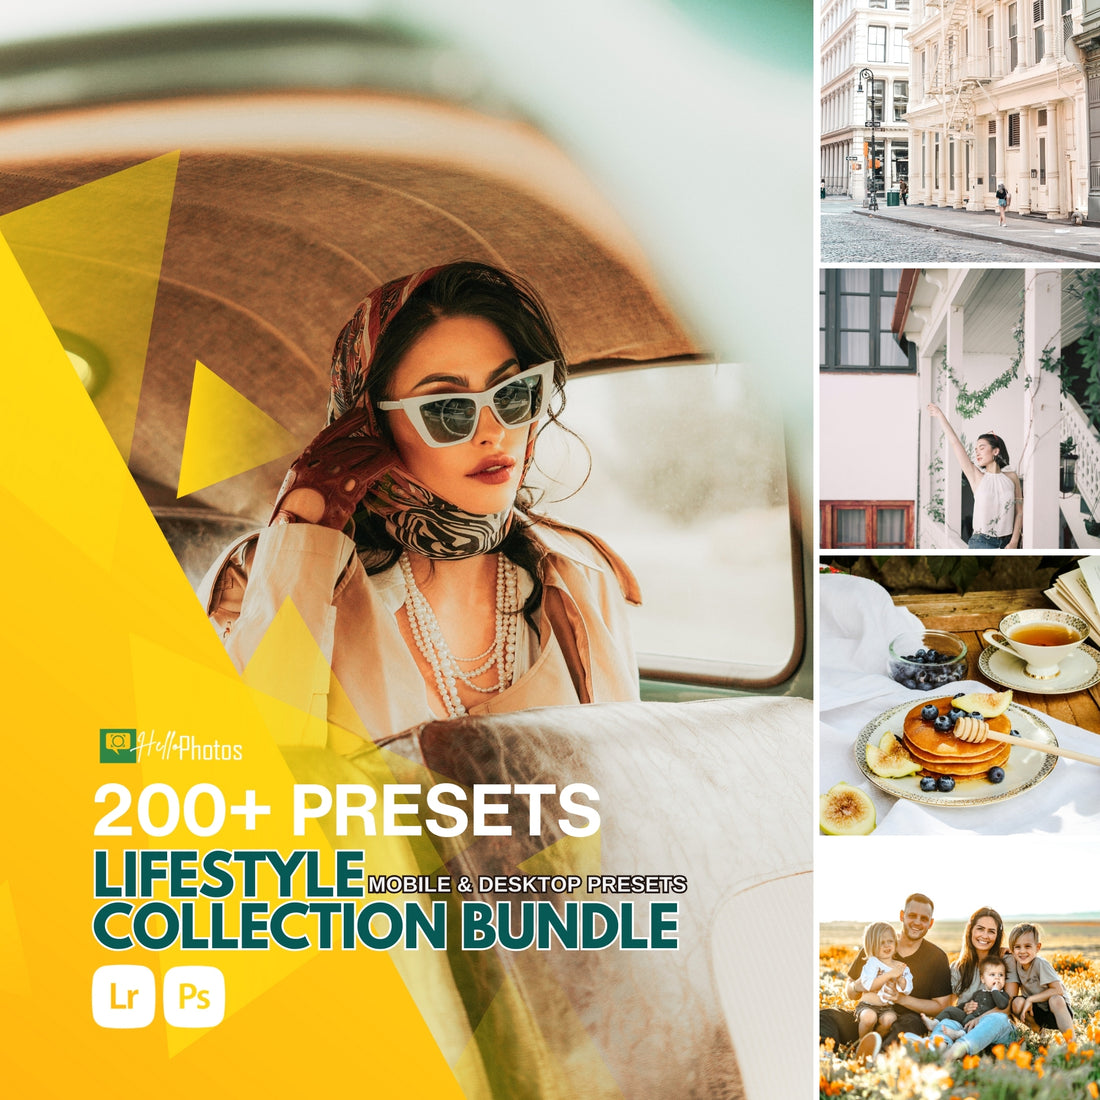 The Master Lifestyle Lightroom Preset Bundle (200+Presets and Video LUTs)